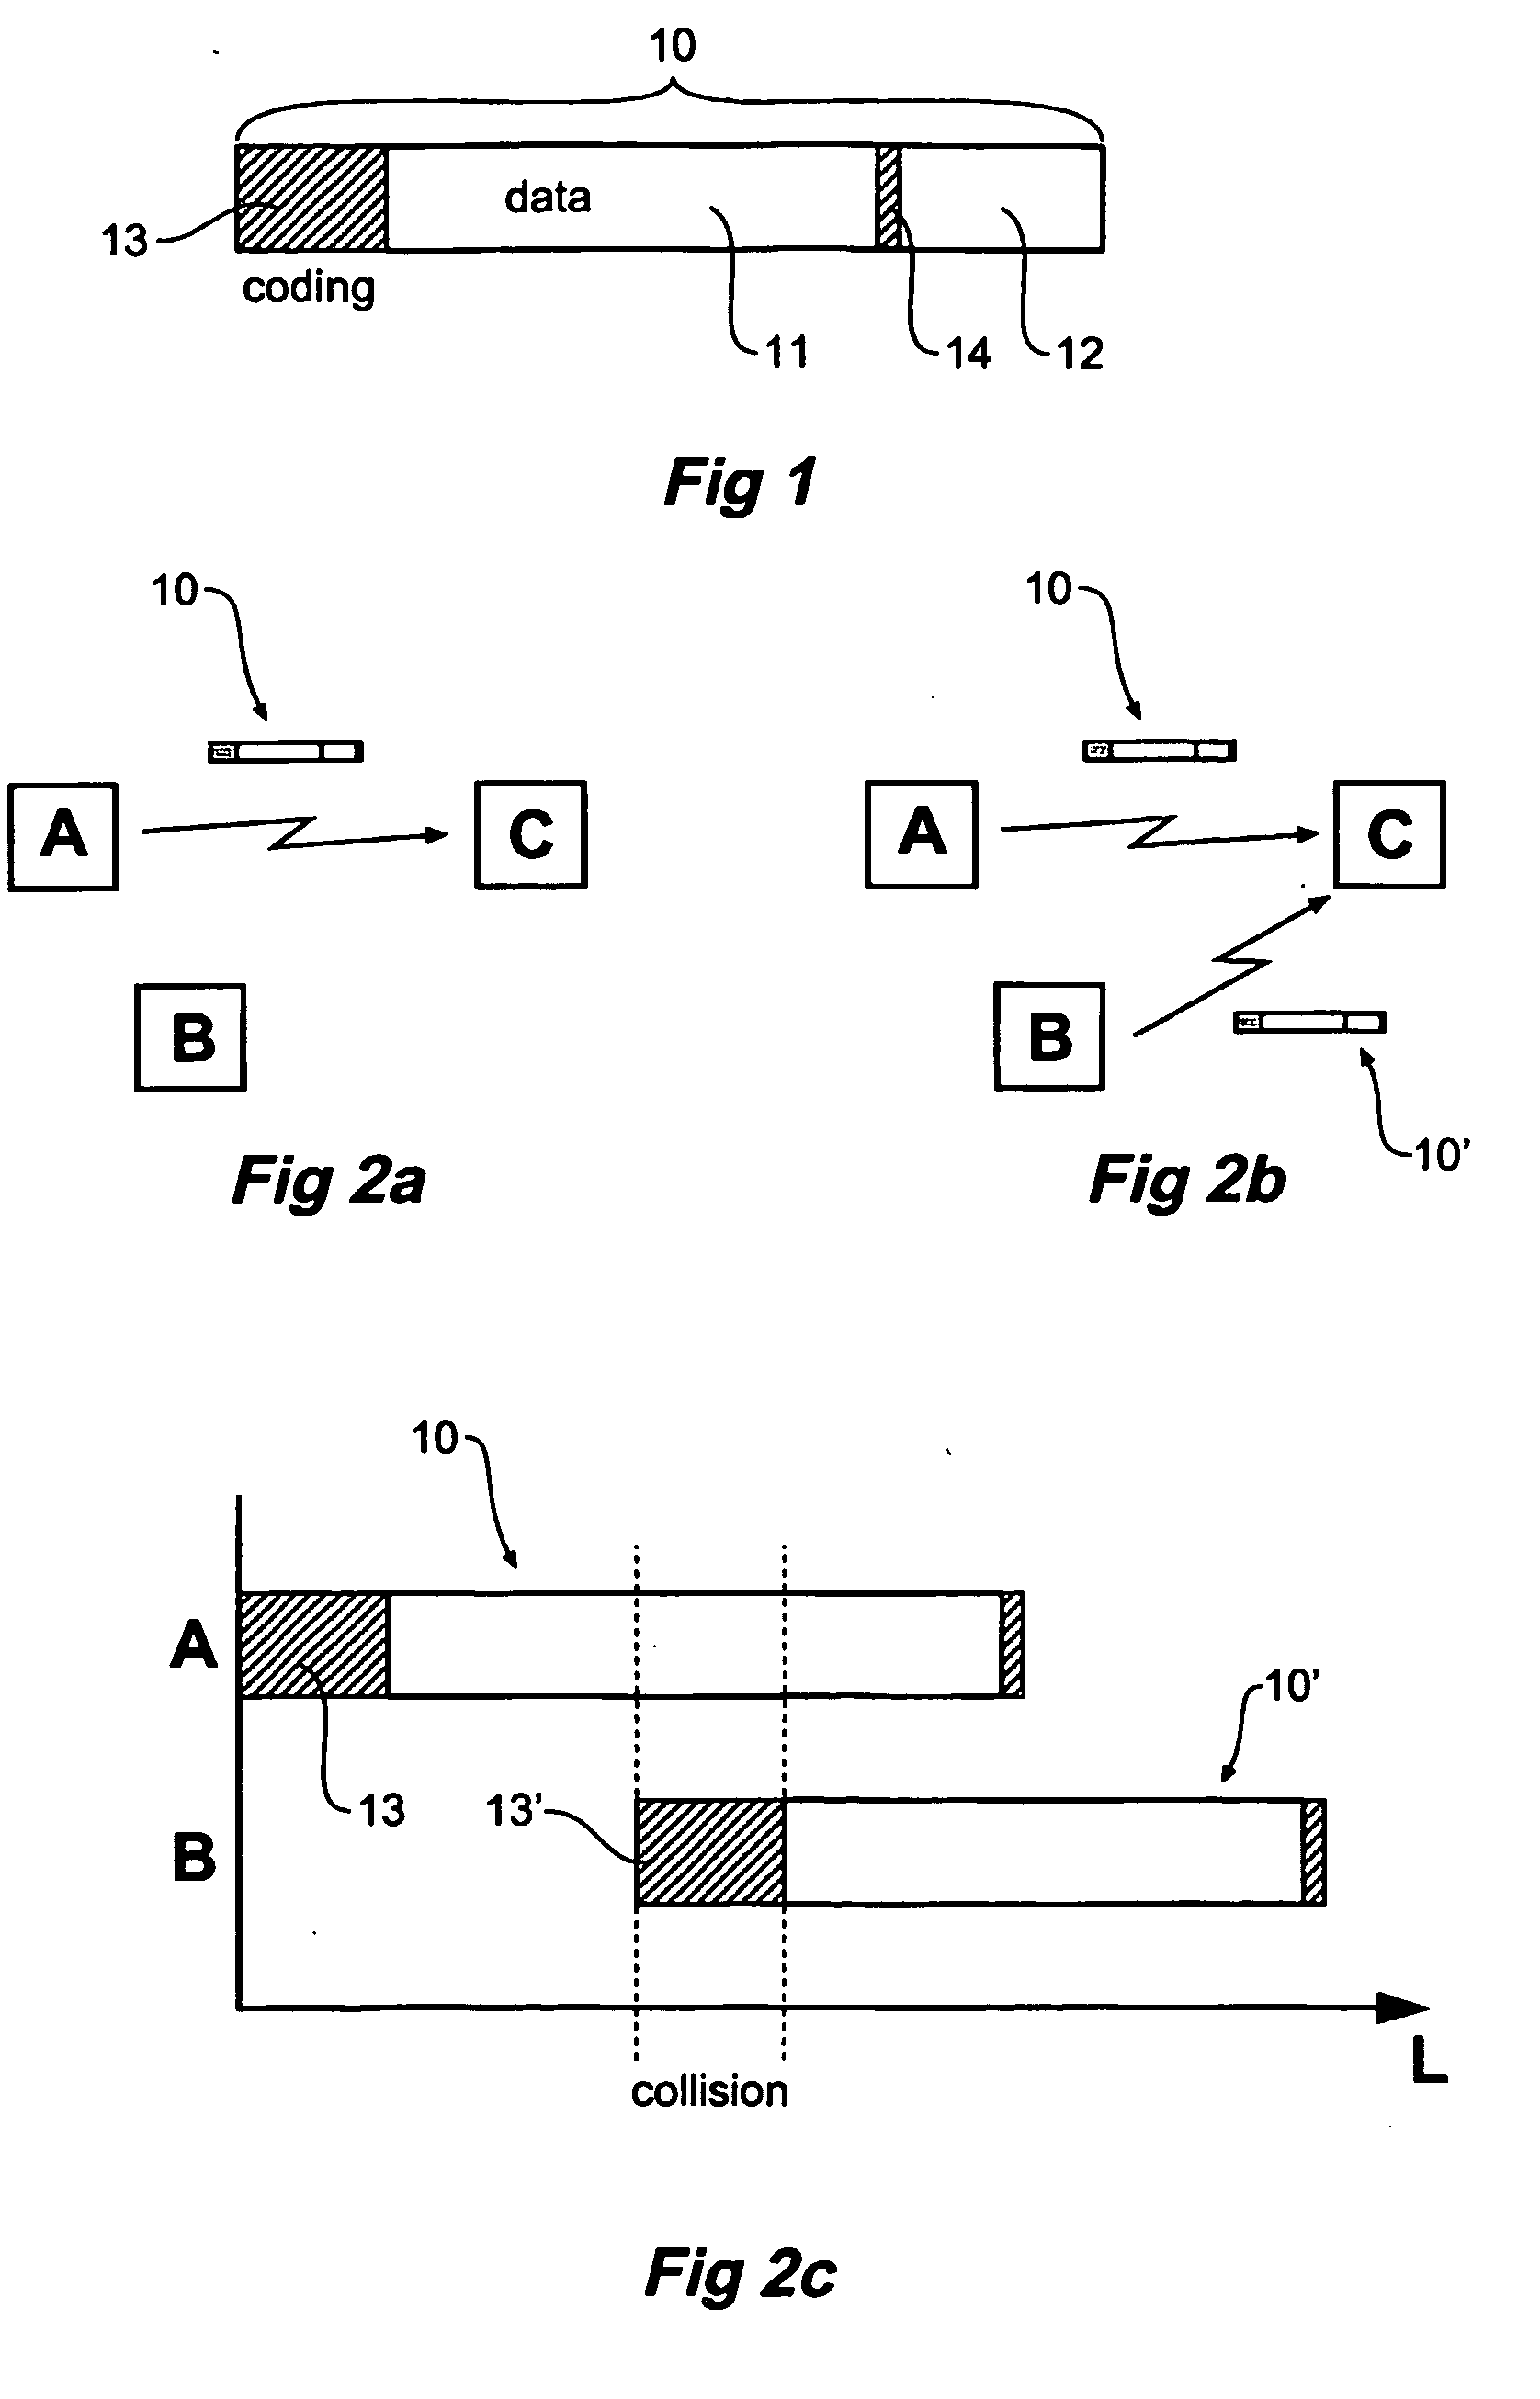 Collision detection in a non-dominant bit radio network communication system